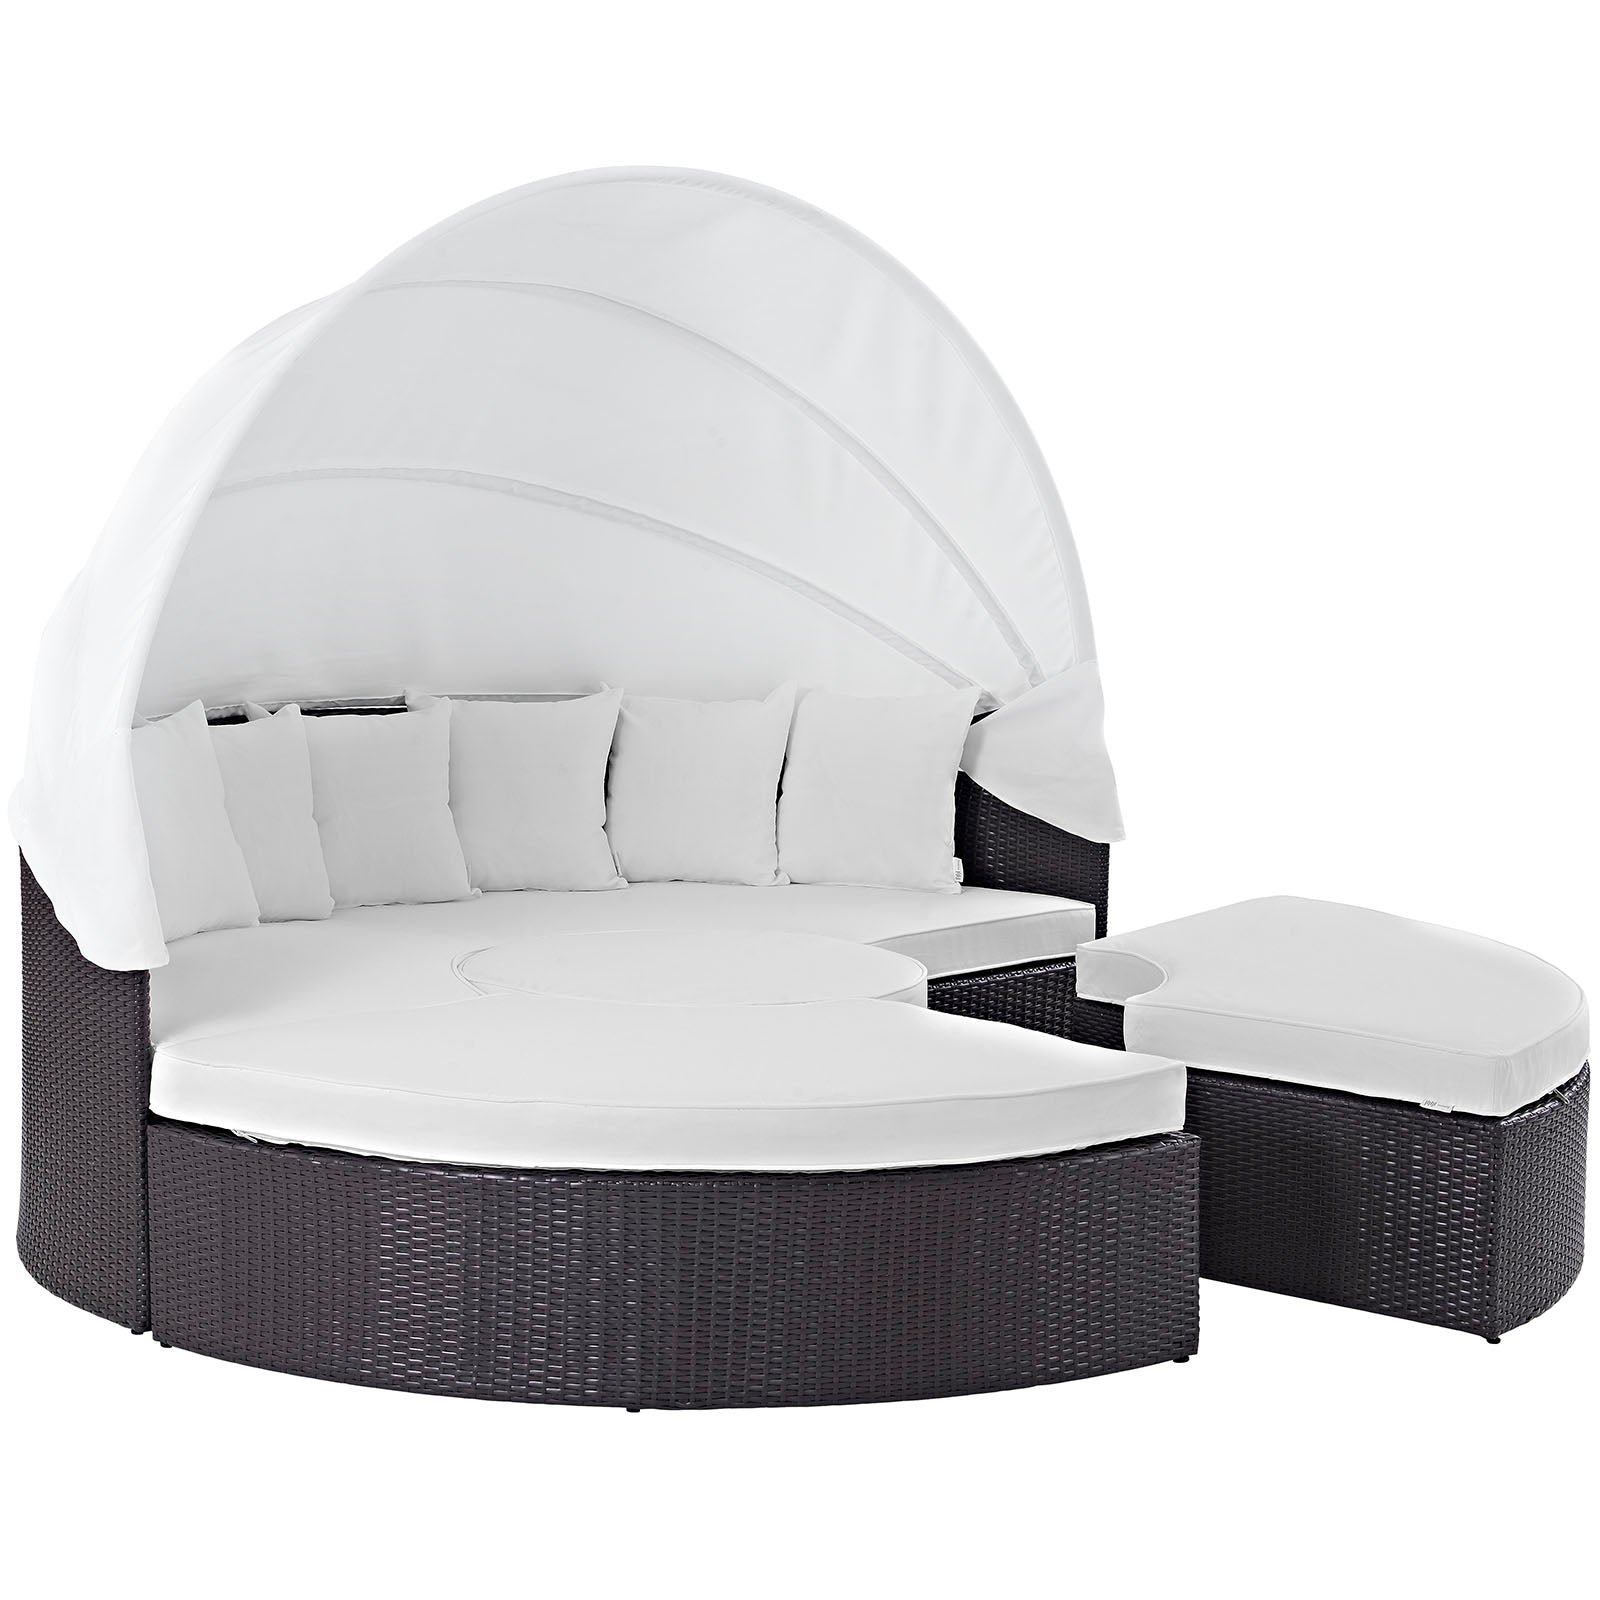 Modway Patio Daybeds - Convene Canopy Outdoor Patio 86.5"W Daybed Espresso White